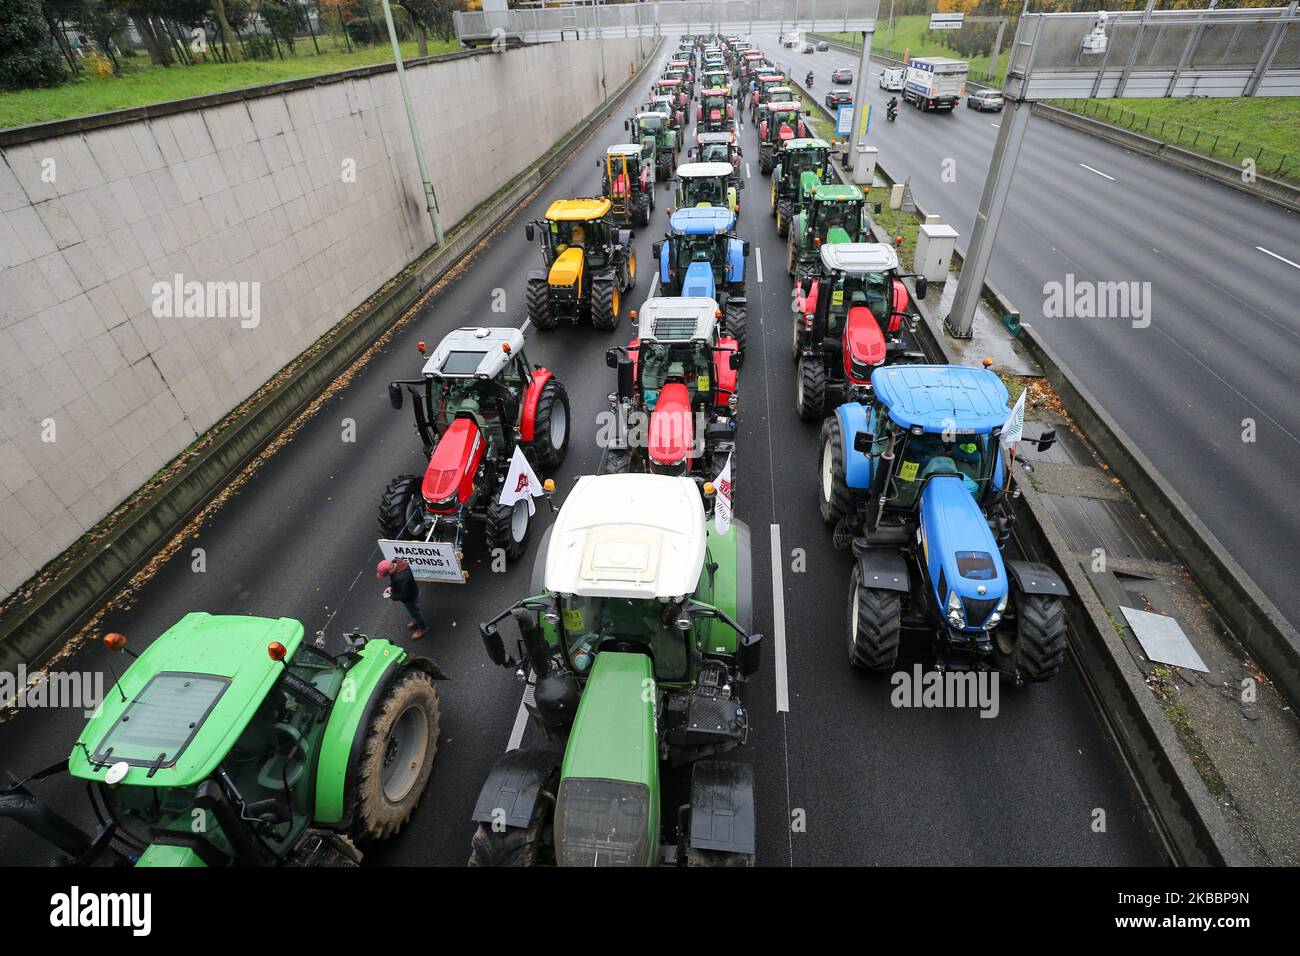 French farmers steer their tractors on The Parisian ring road (Peripherique) at Porte Dauphine in Paris on November 27, 2019, during a protest against government policies. Hundreds of French farmers descended on Paris by tractor to protest the struggles of the farming community and put pressure on supermarket chains to pay them more for their produce. Some 340 kilometres (210 miles) of tailbacks were reported during rush hour in Paris as convoys of tractors snarled traffic along the main roads into the capital. (Photo by Michel Stoupak/NurPhoto) Stock Photo